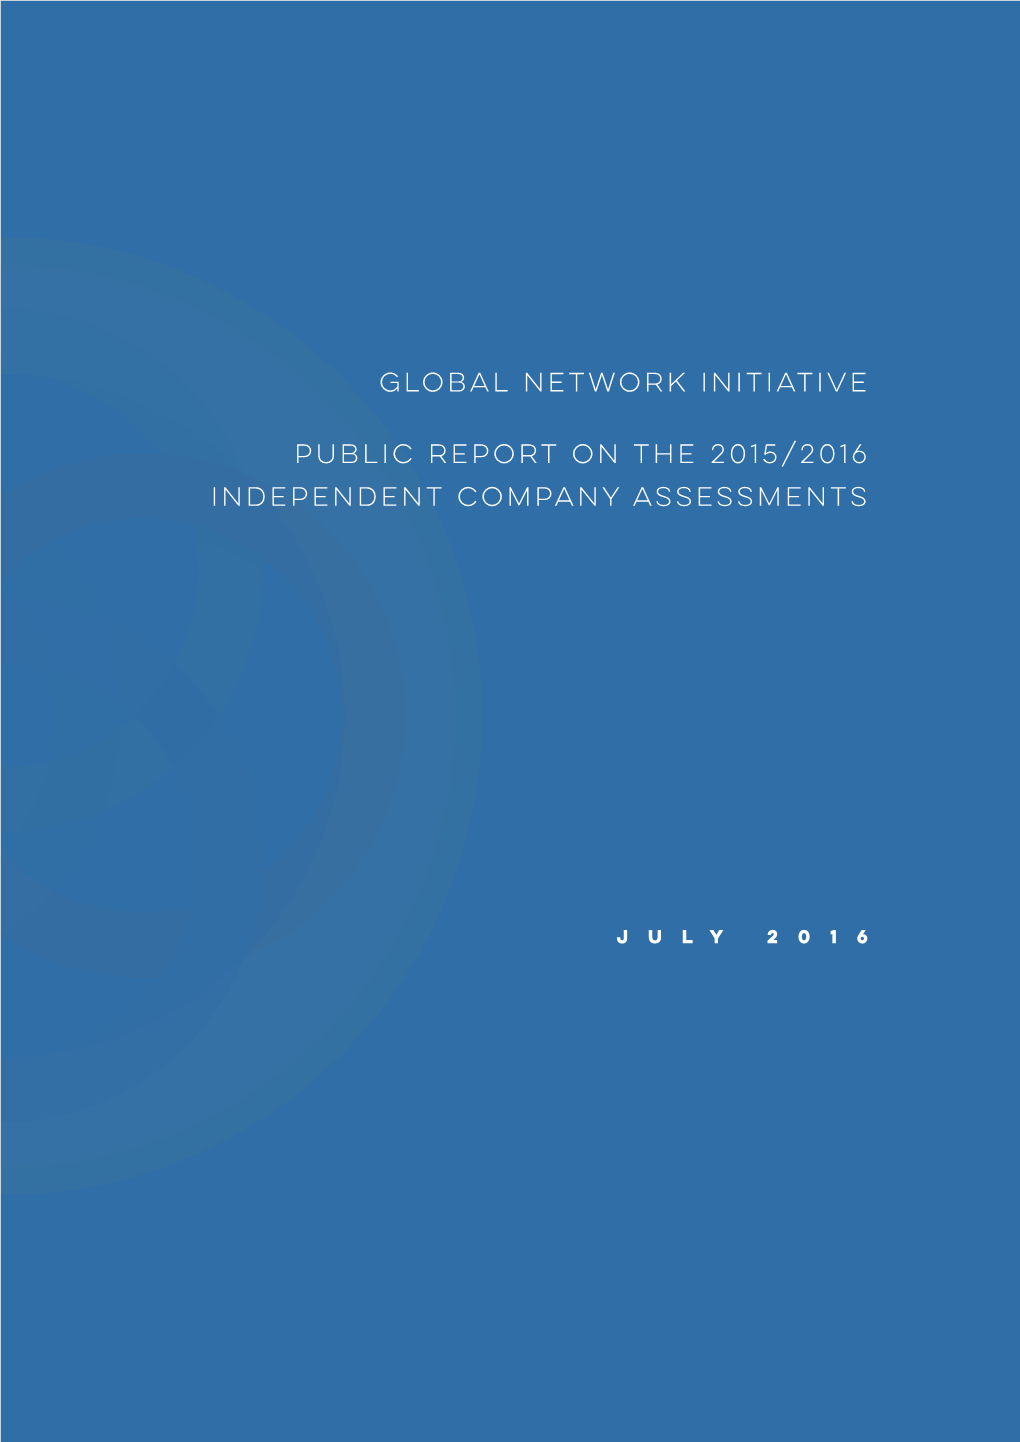 Global Network Initiative Public Report on the 2015/2016 Independent